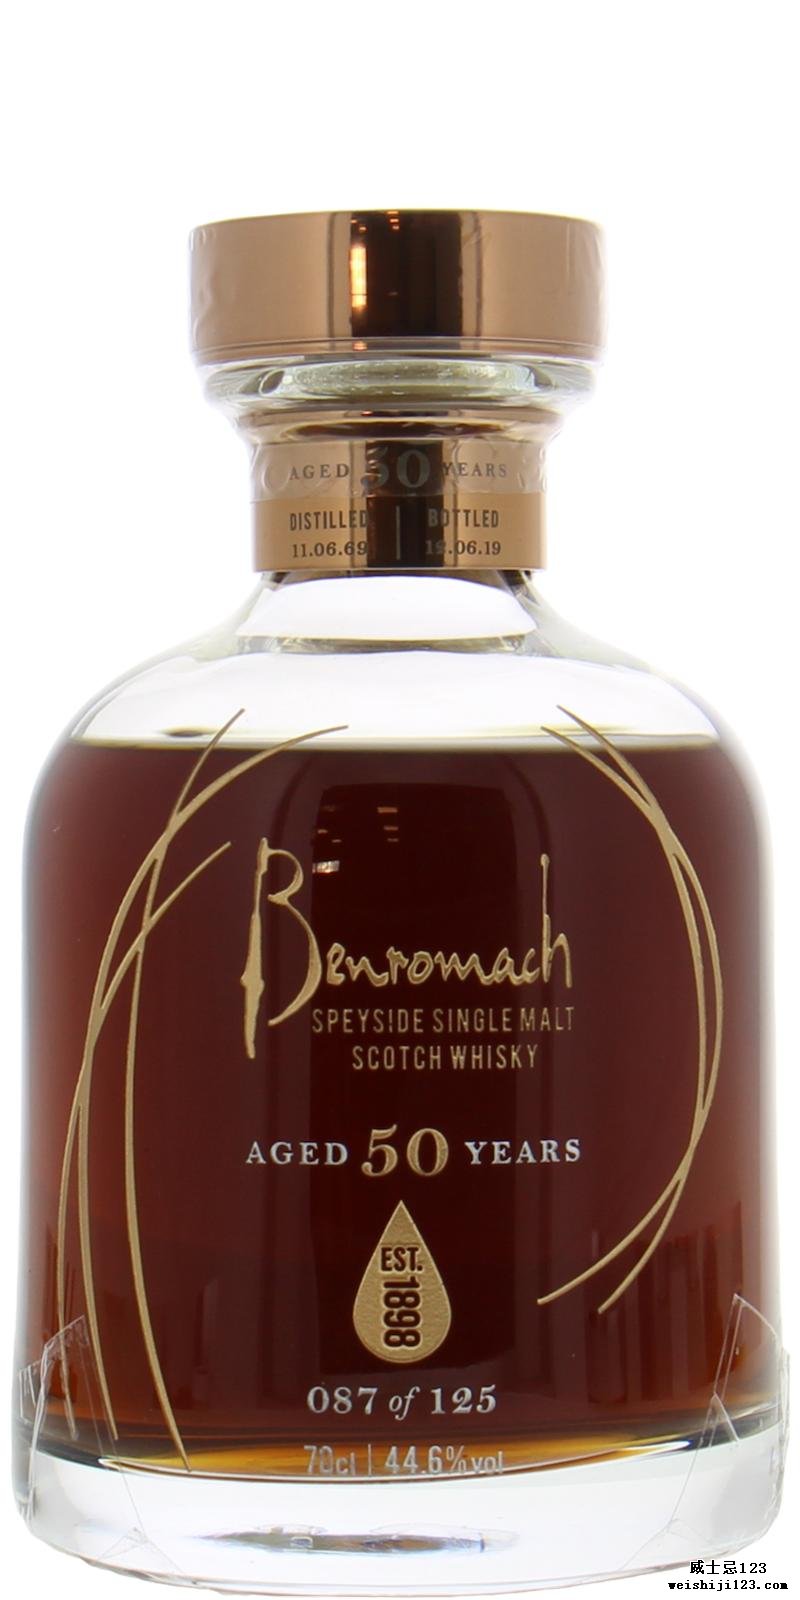 Benromach 50-year-old